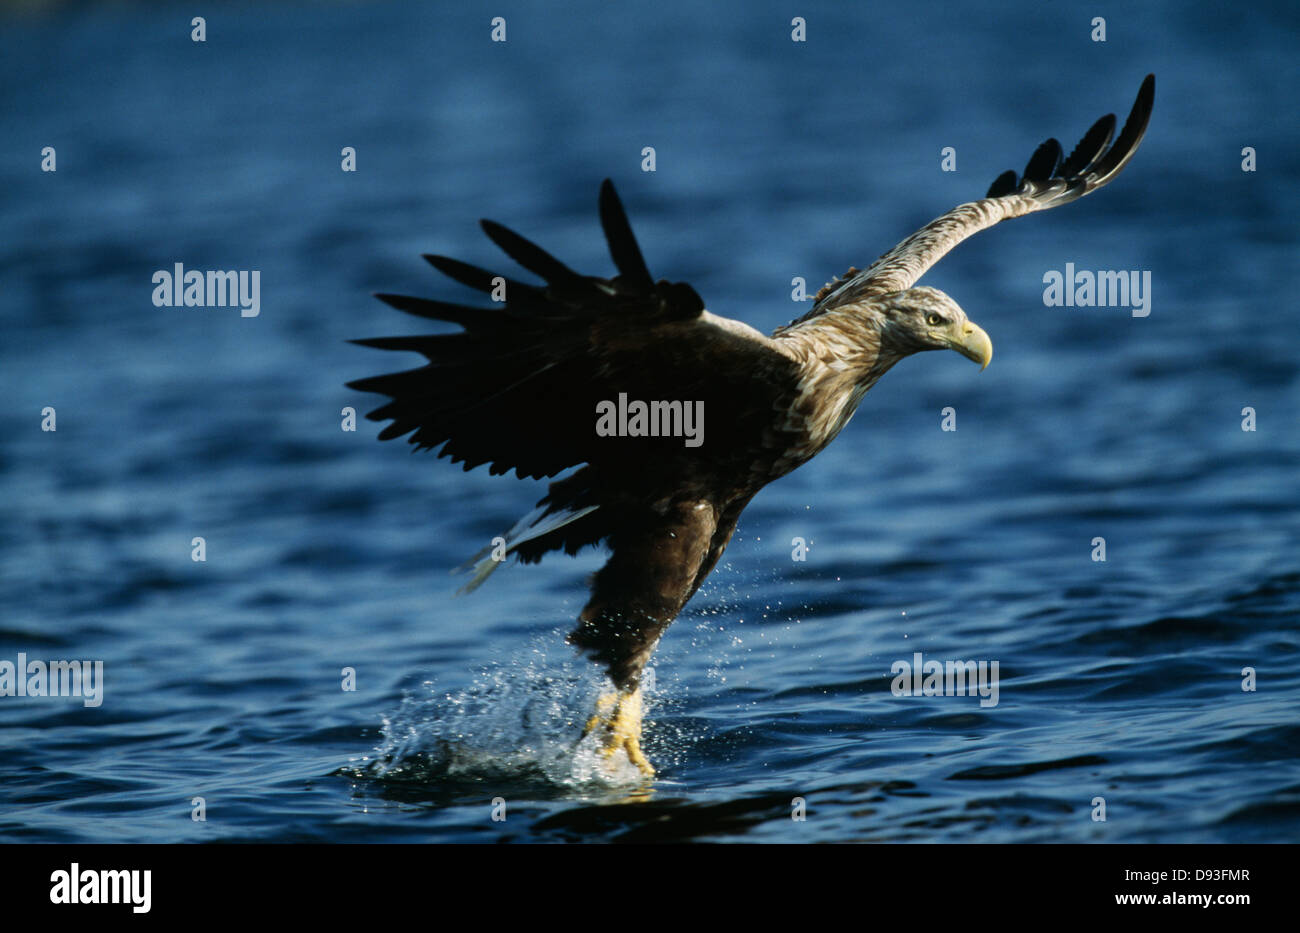 Eagle hunting above water Stock Photo